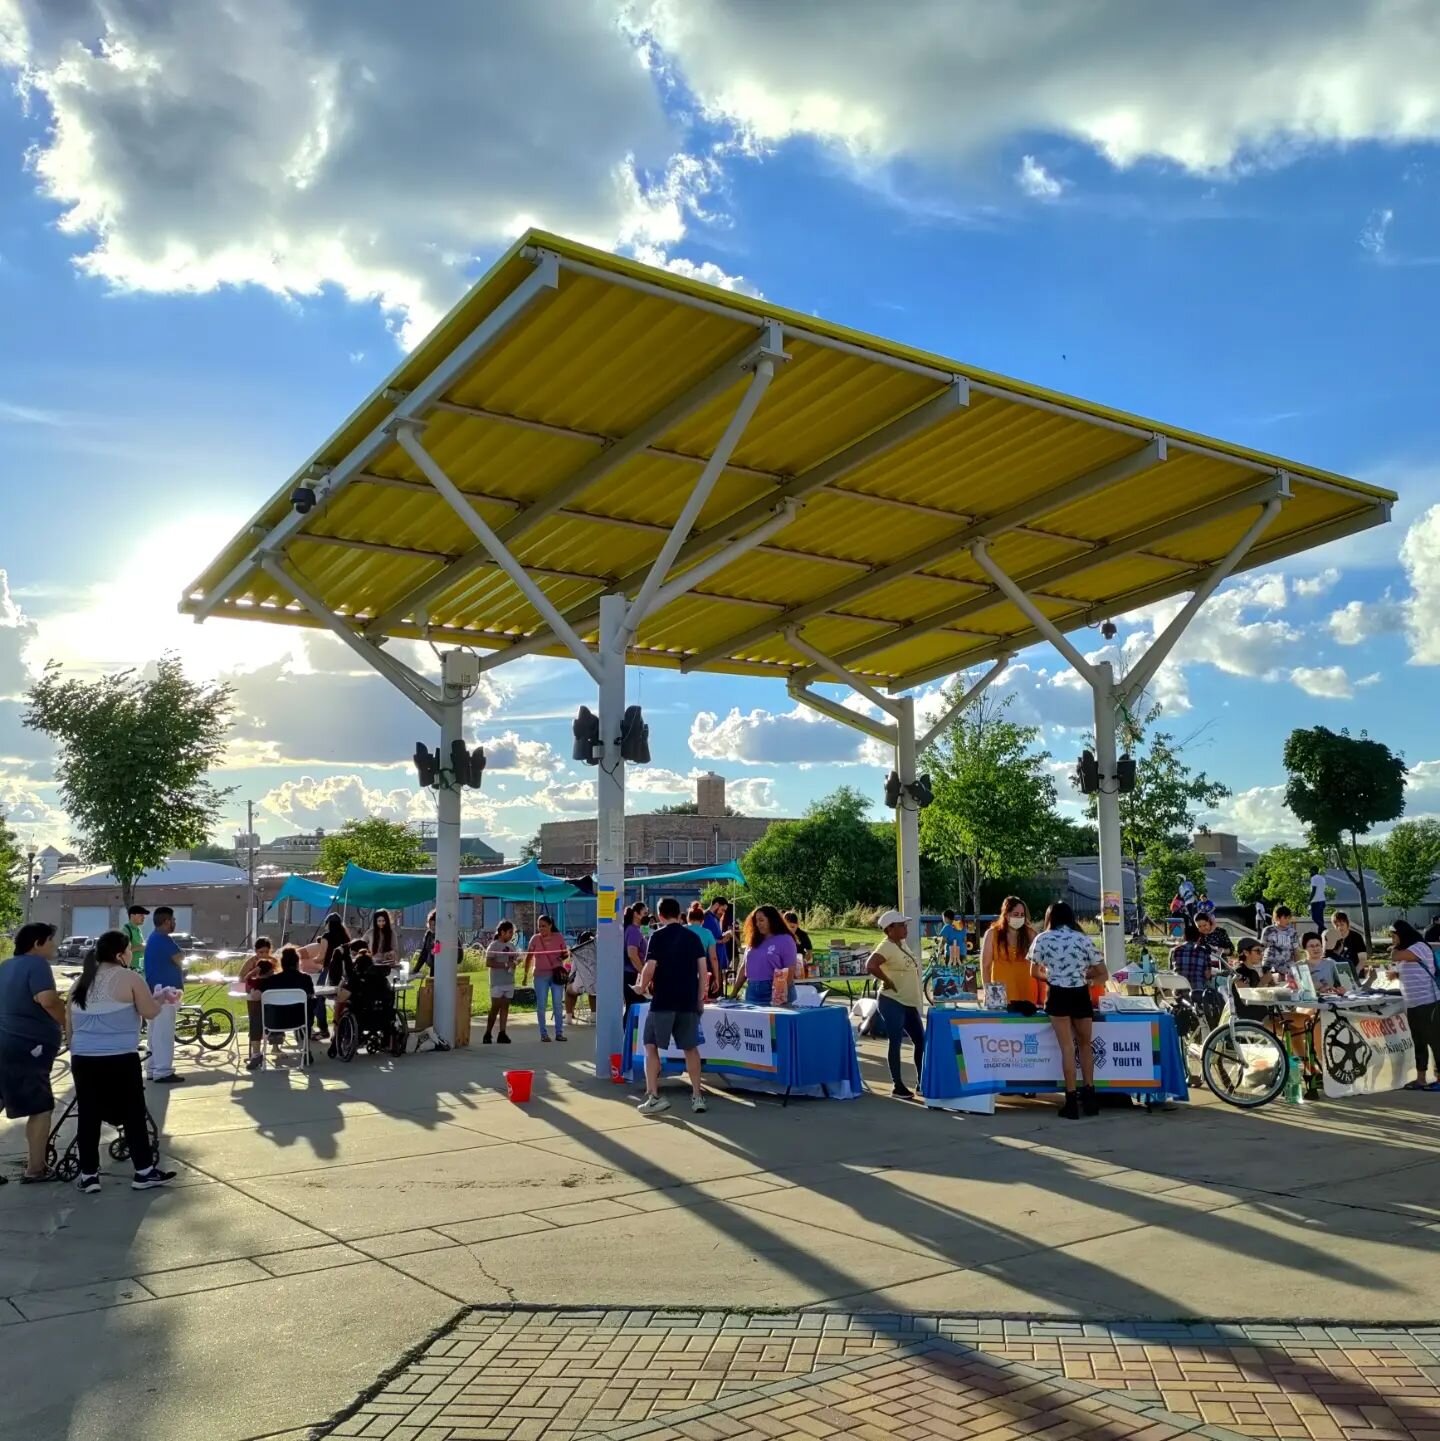 For each of this summer's MCC events with Night Out in the Parks @chicagoparks , we've been featuring guest artists and community groups. At La Villita Park in July, @h0ney_lucio @gloeone @sarapradostudio @lvejo20 @unetelavillita @workingbikes and Te